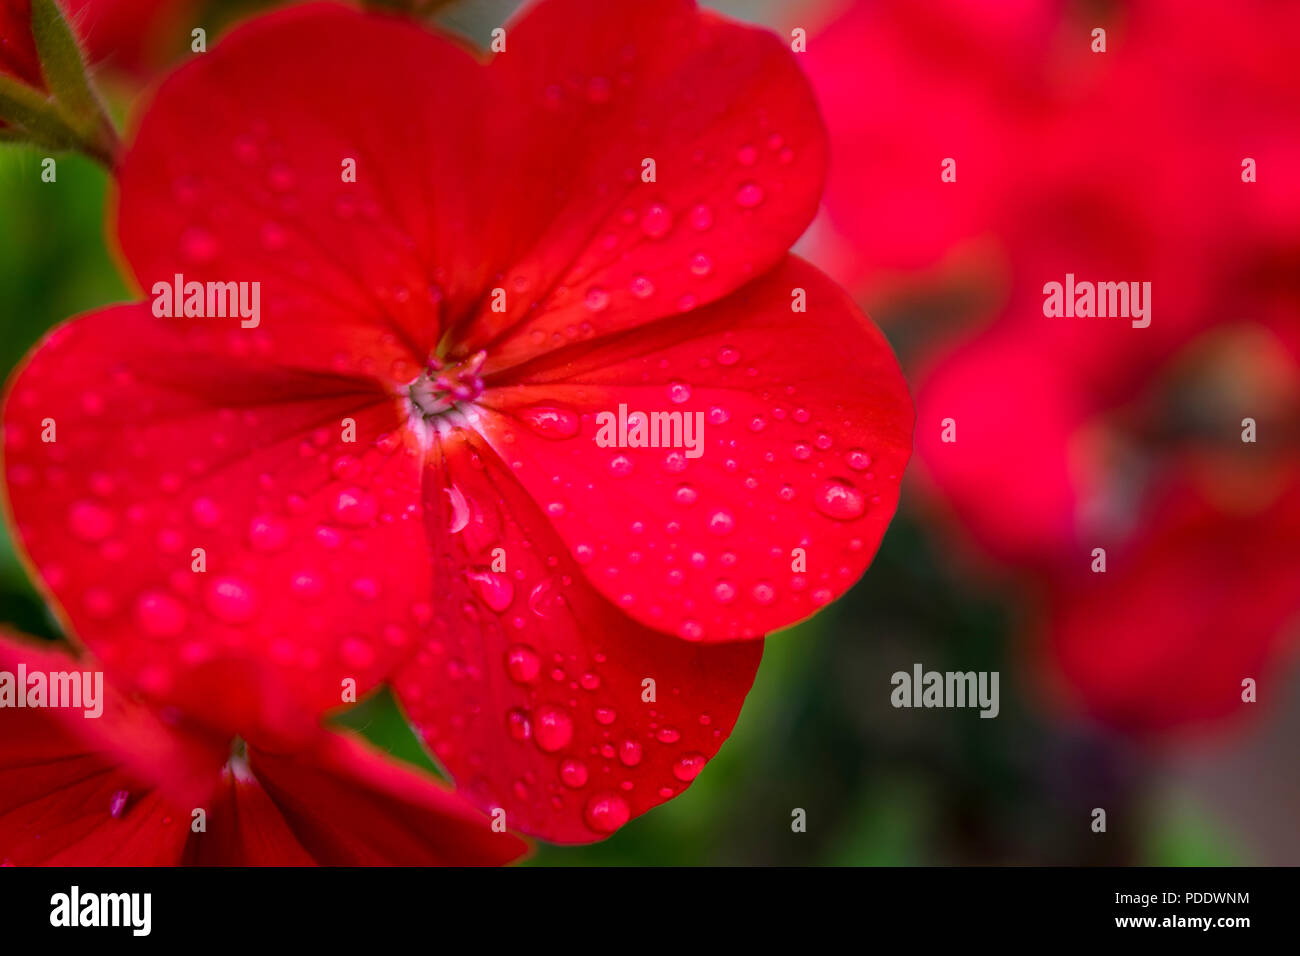 Bright carmine coloured flower of Impatiens, Busy Lizzie, with dew drops on the petals Stock Photo